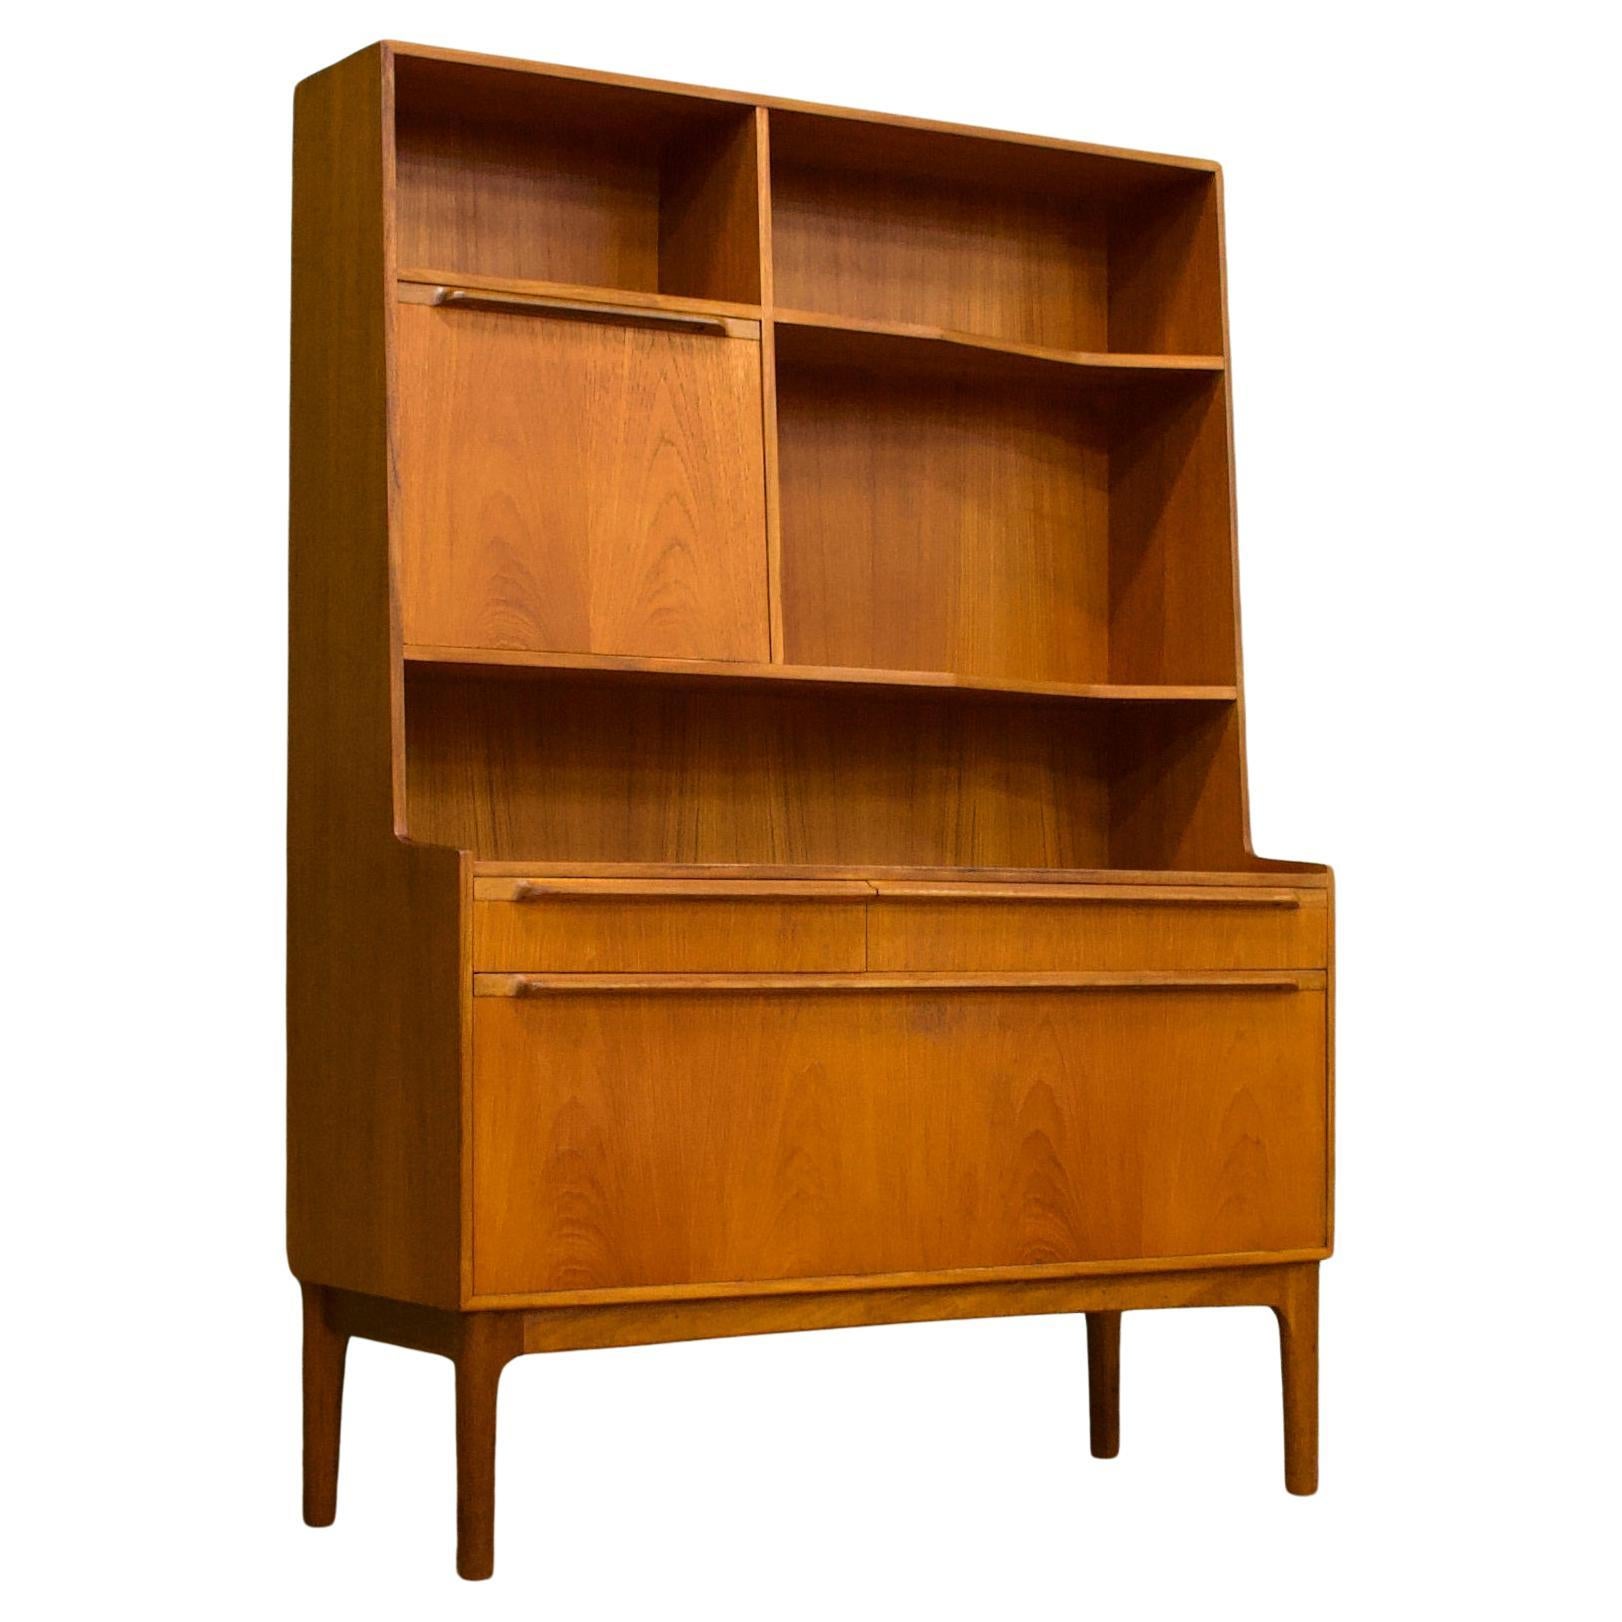 Teak Sideboard or Highboard from McIntosh, 1960s For Sale